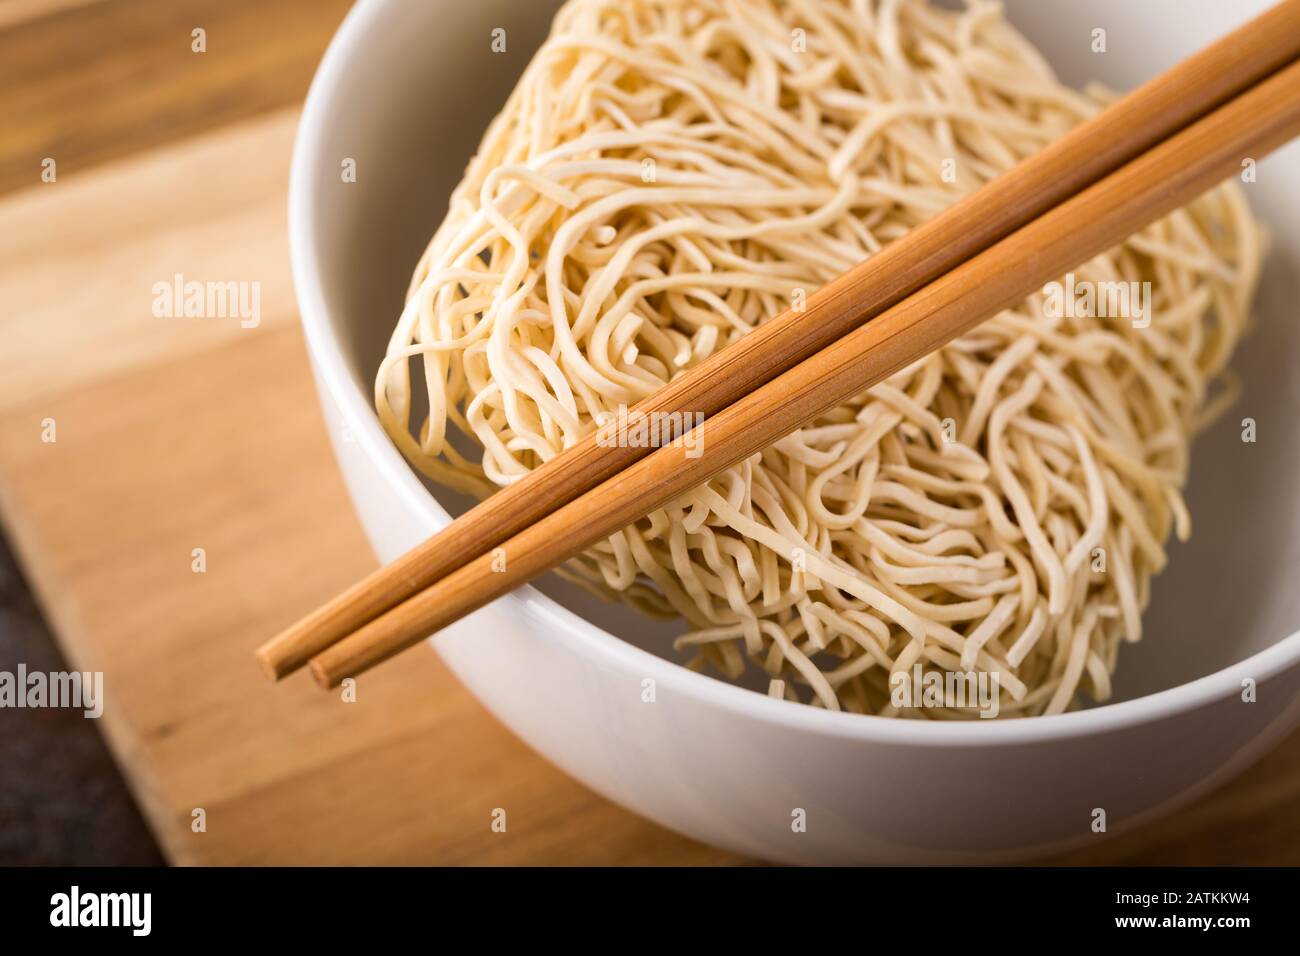 Chinese dried noodles in a bowl. Bamboo sticks. Asian cuisine. Stock Photo